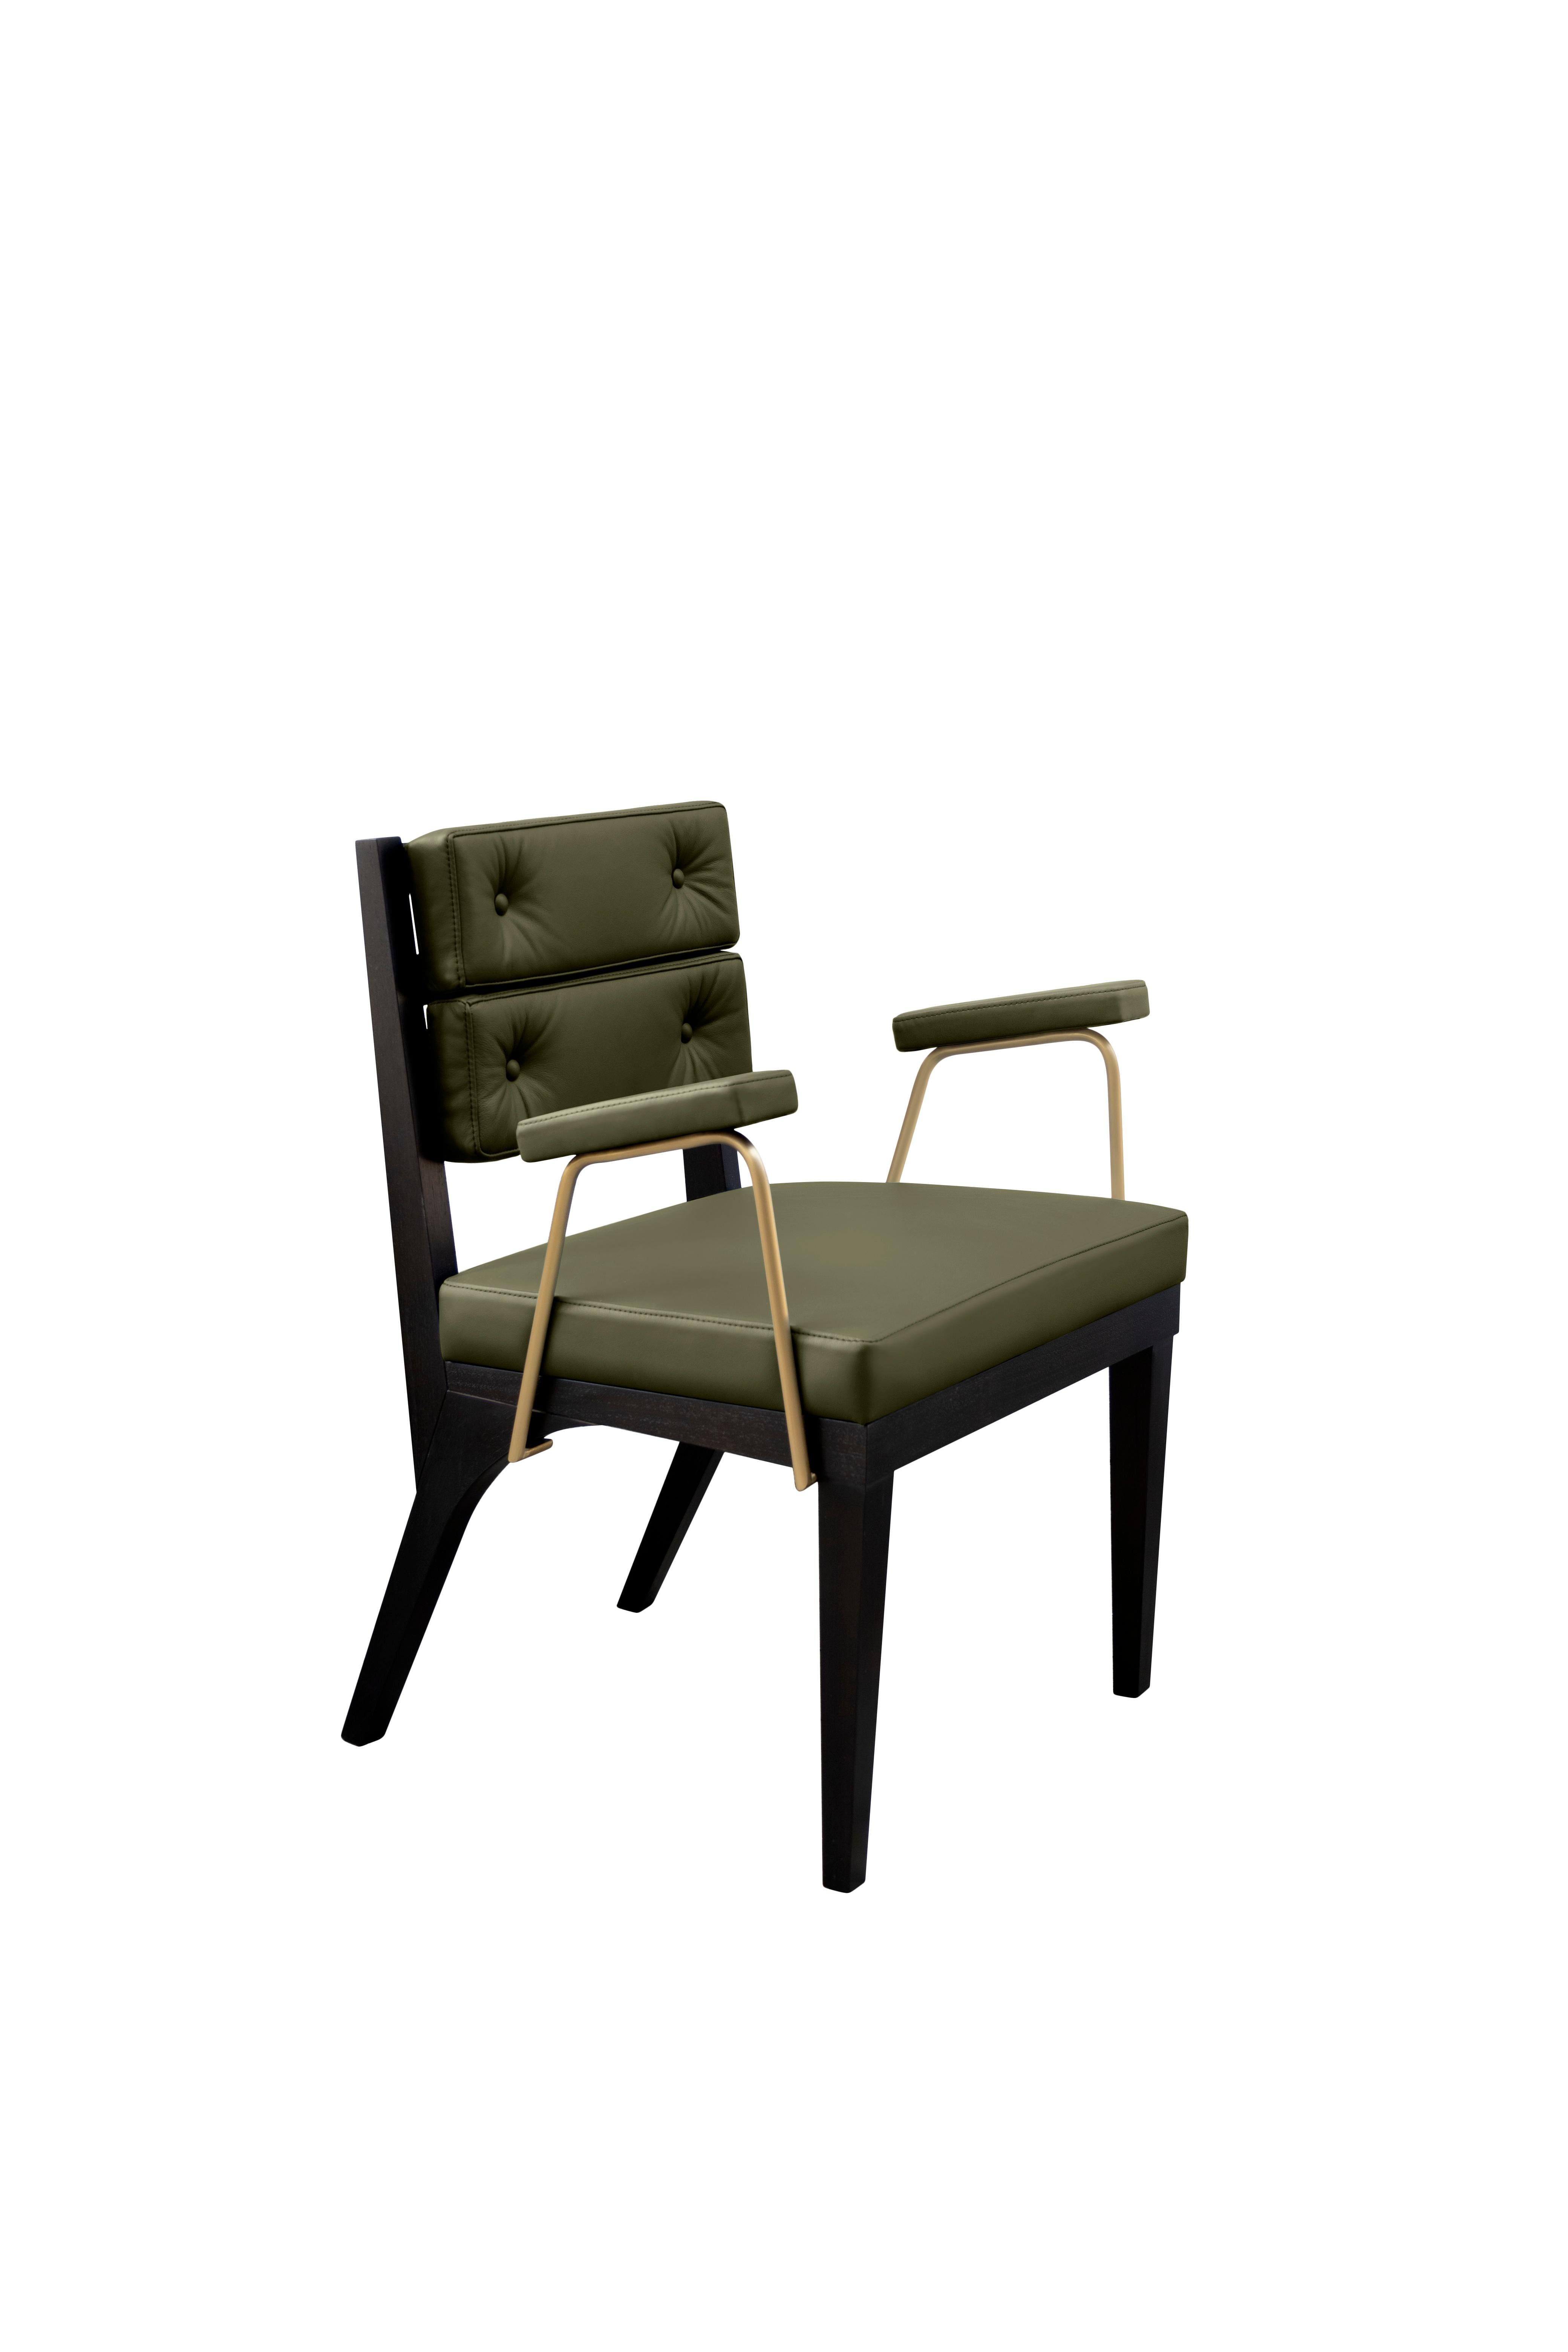 Contemporary 21st Century Walnut Wood Robinson Dining Chair Linen For Sale